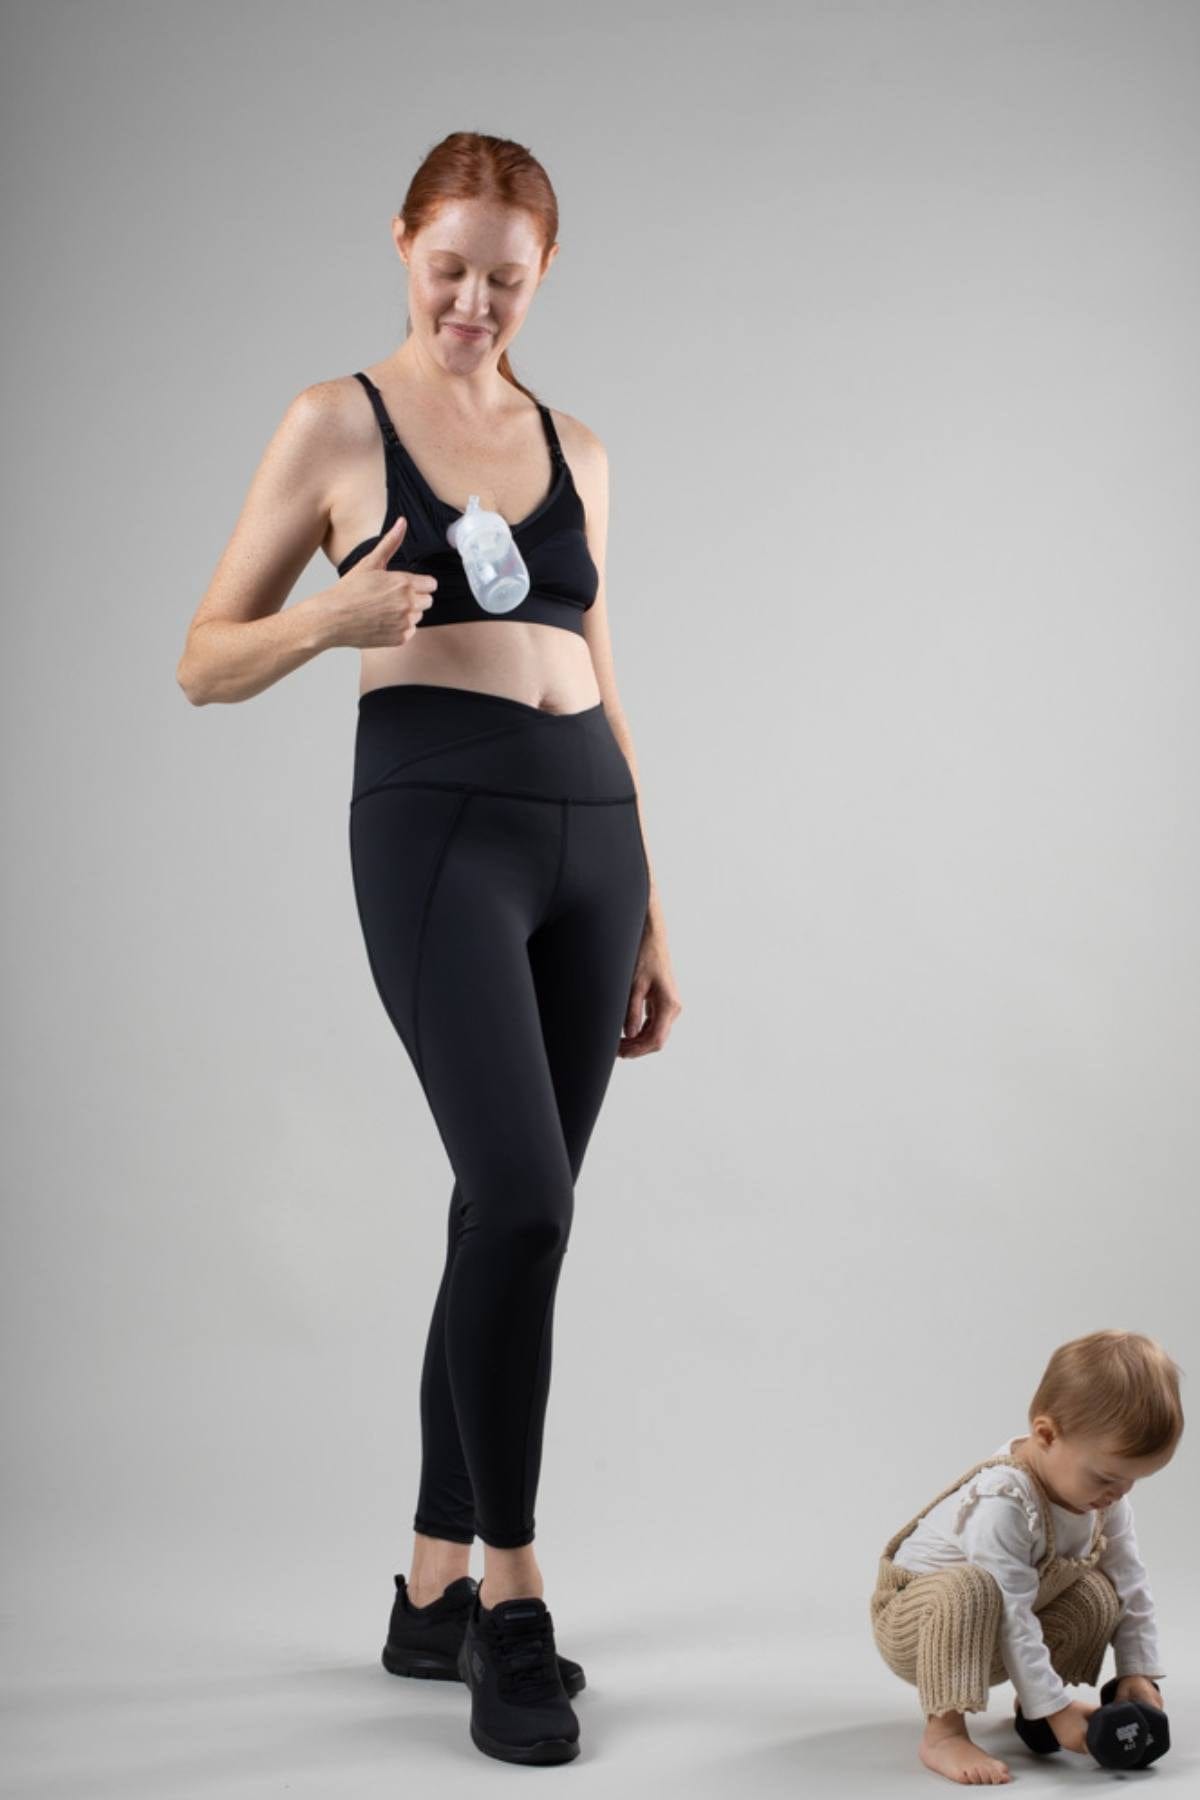 Simple Wishes Supermom All-in-One Nursing and Pumping Bra, Patent